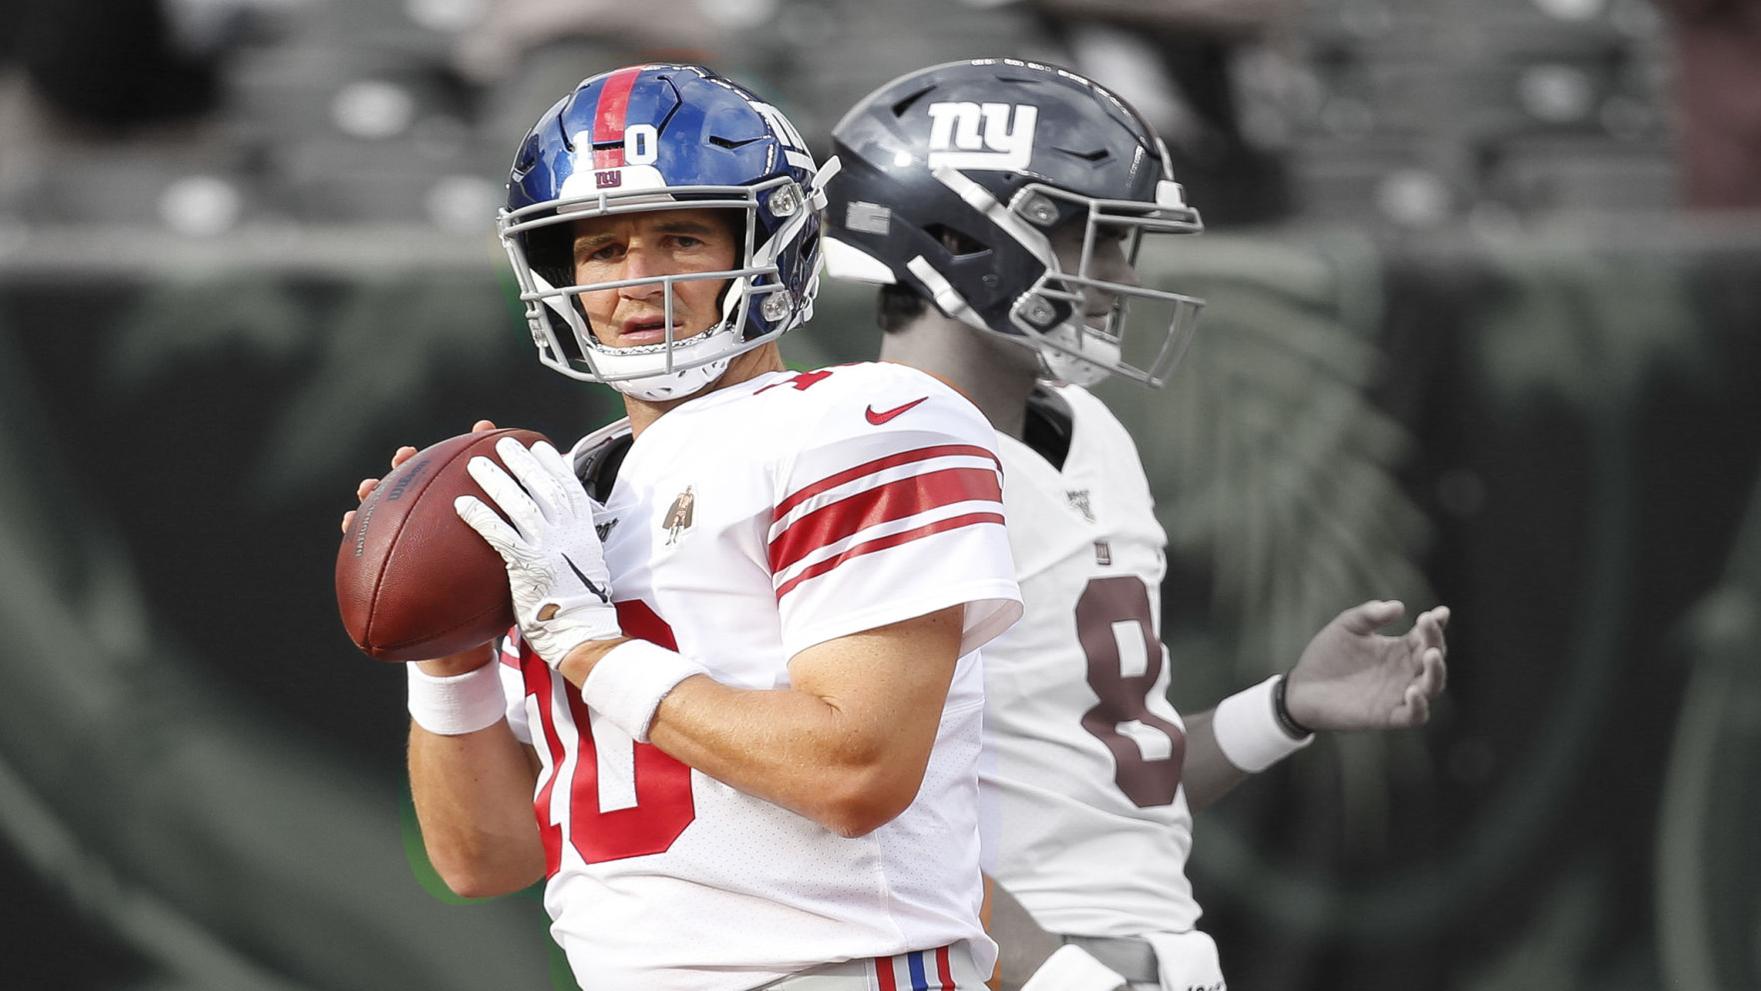 Eli Manning returning to the Giants in new role